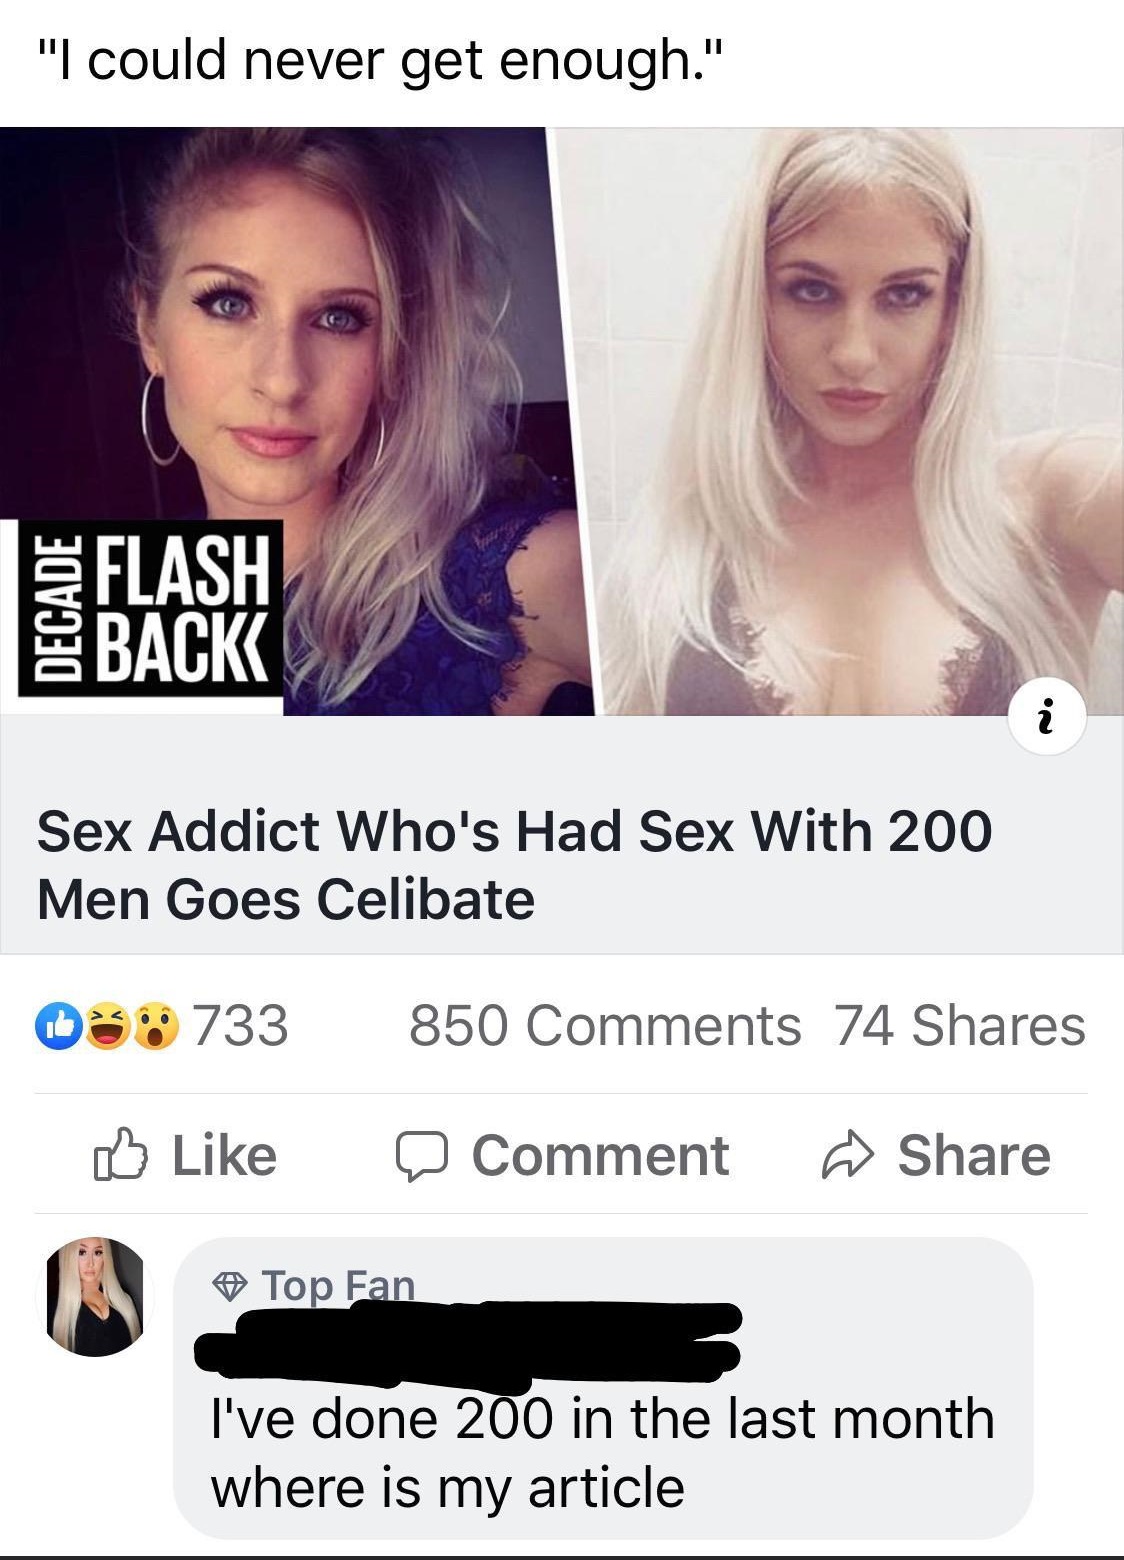 blond - "I could never get enough." Flash S Back Sex Addict Who's Had Sex With 200 Men Goes Celibate 08.733 850 74 Top Fan a Comment @ Top Fan I've done 200 in the last month where is my article